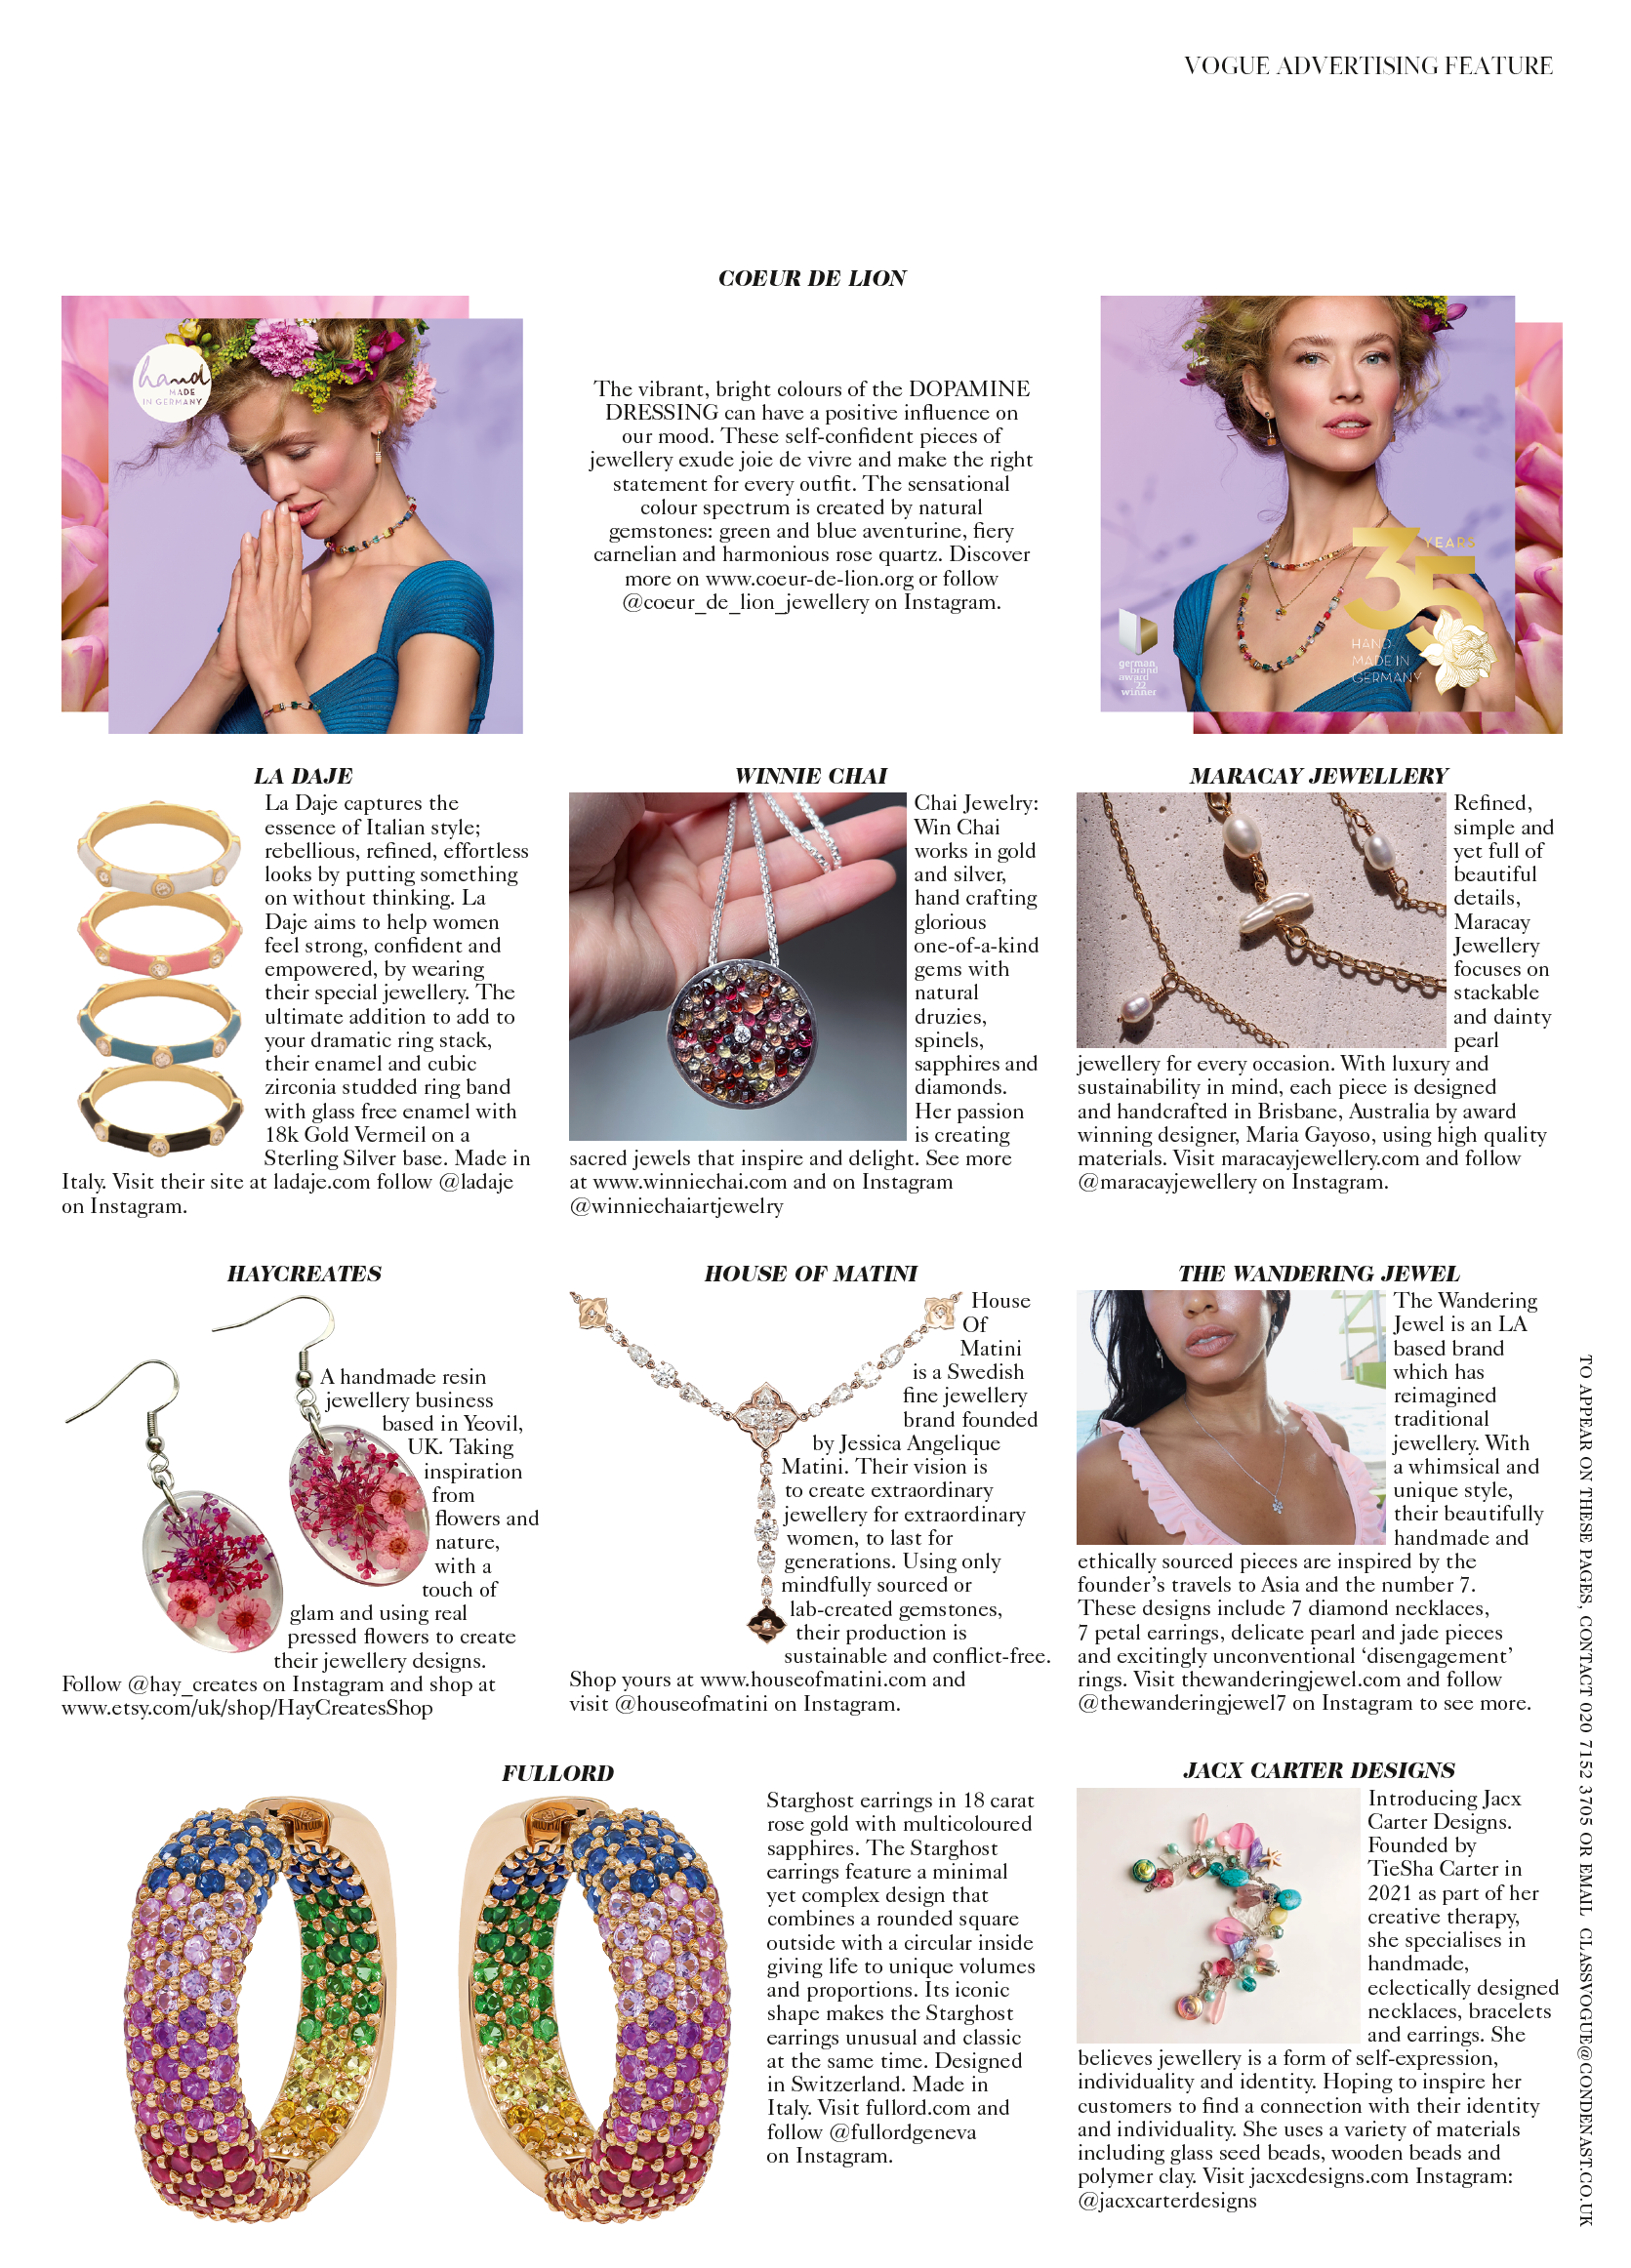 vogue magazine page highlighting the 7 diamond love knot necklace  from The Wandering Jewel 